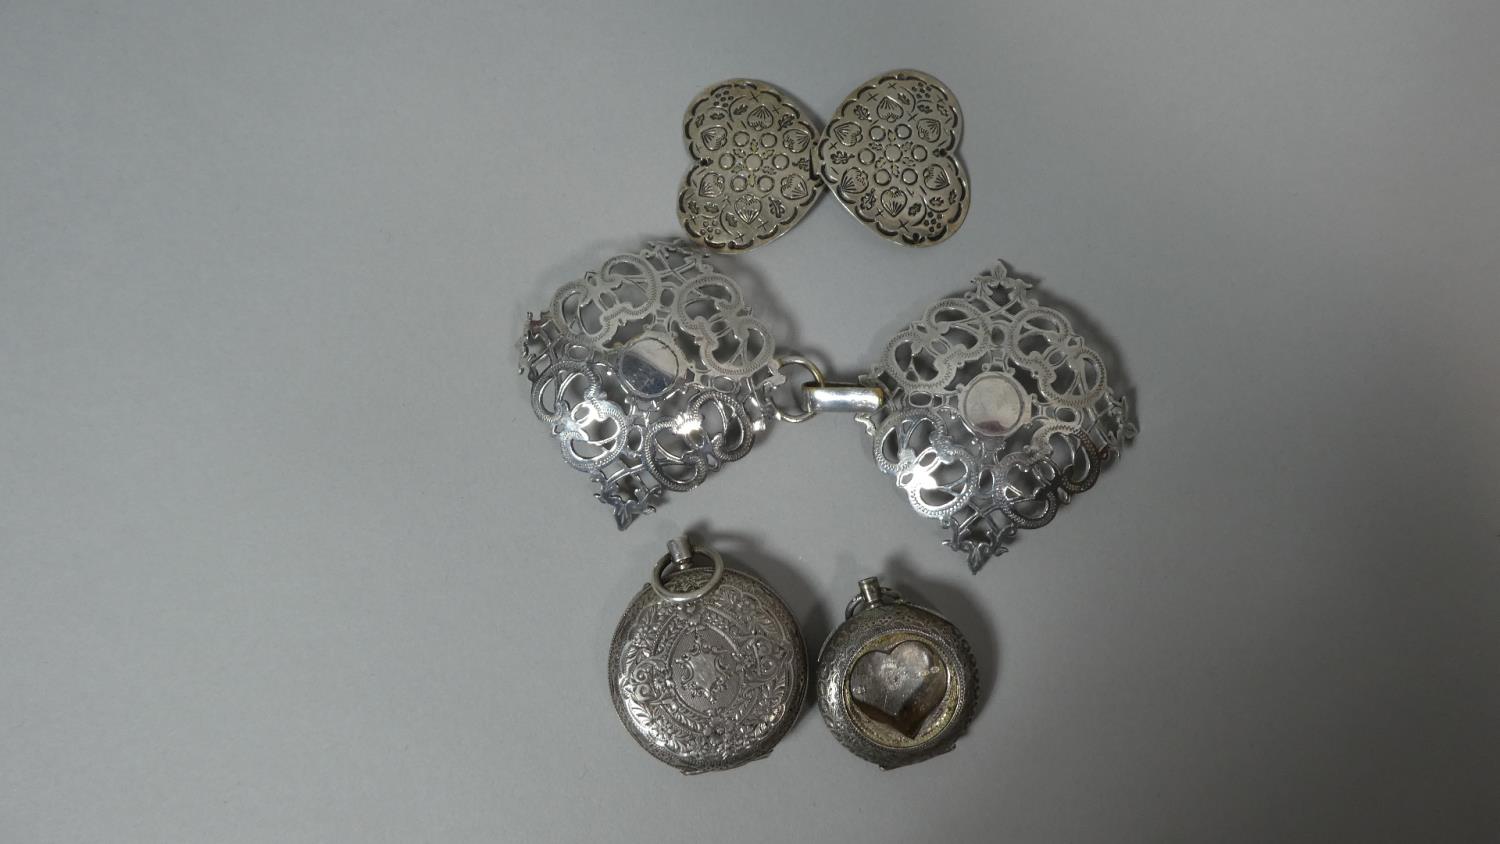 A Ladies Silver Pocket Watch Case, Two Silver Plated Belt Buckles and Another Silver Pocket Watch